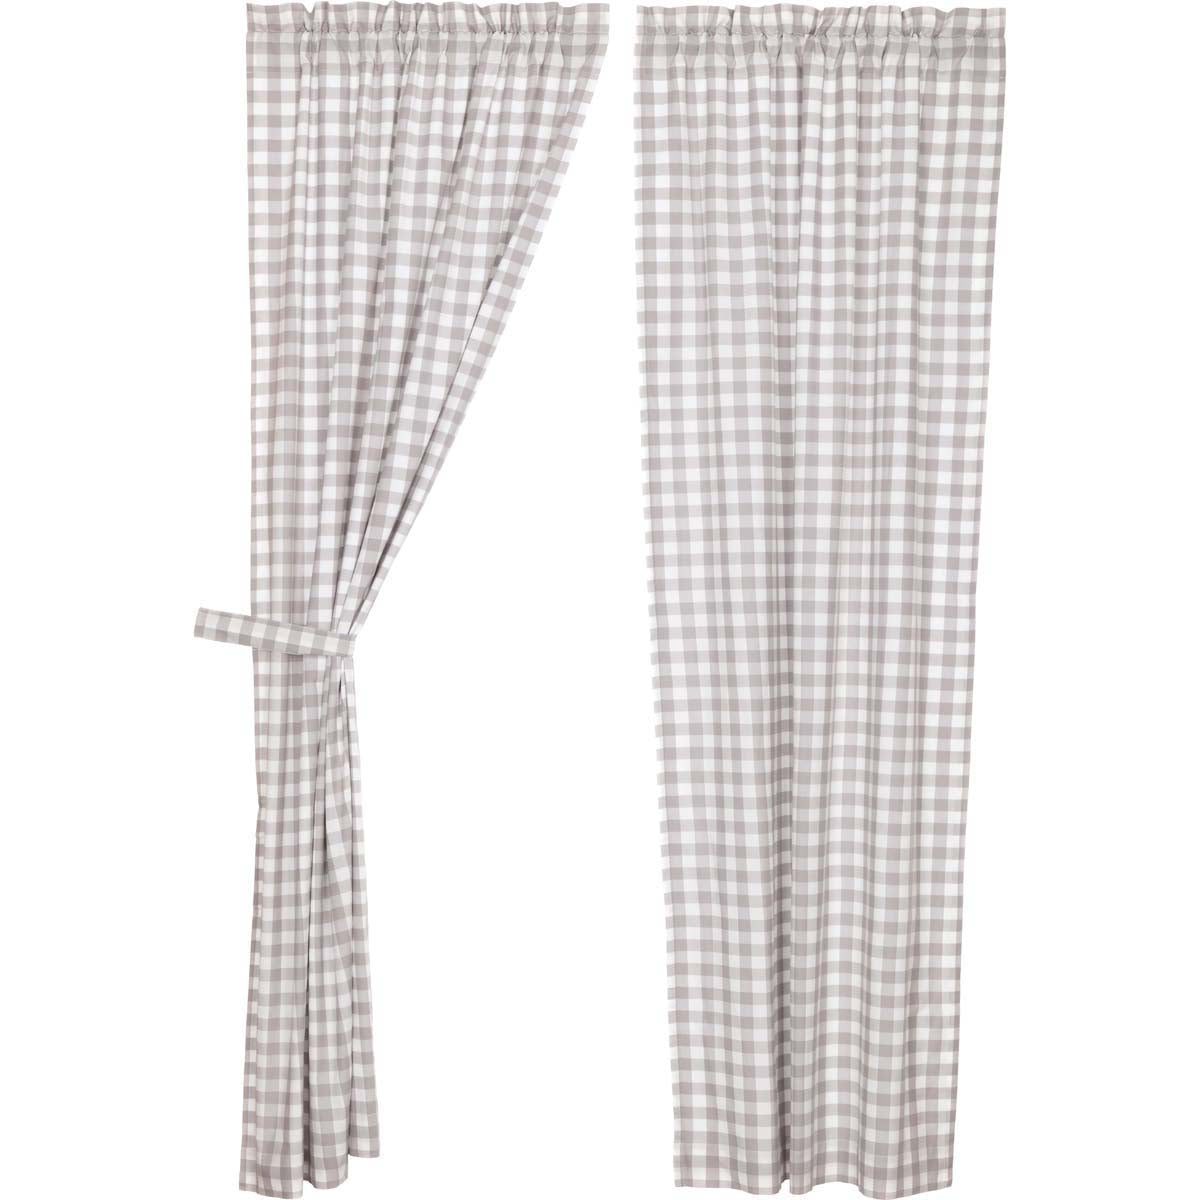 April & Olive Annie Buffalo Grey Check Panel Set of 2 84x40 By VHC Brands